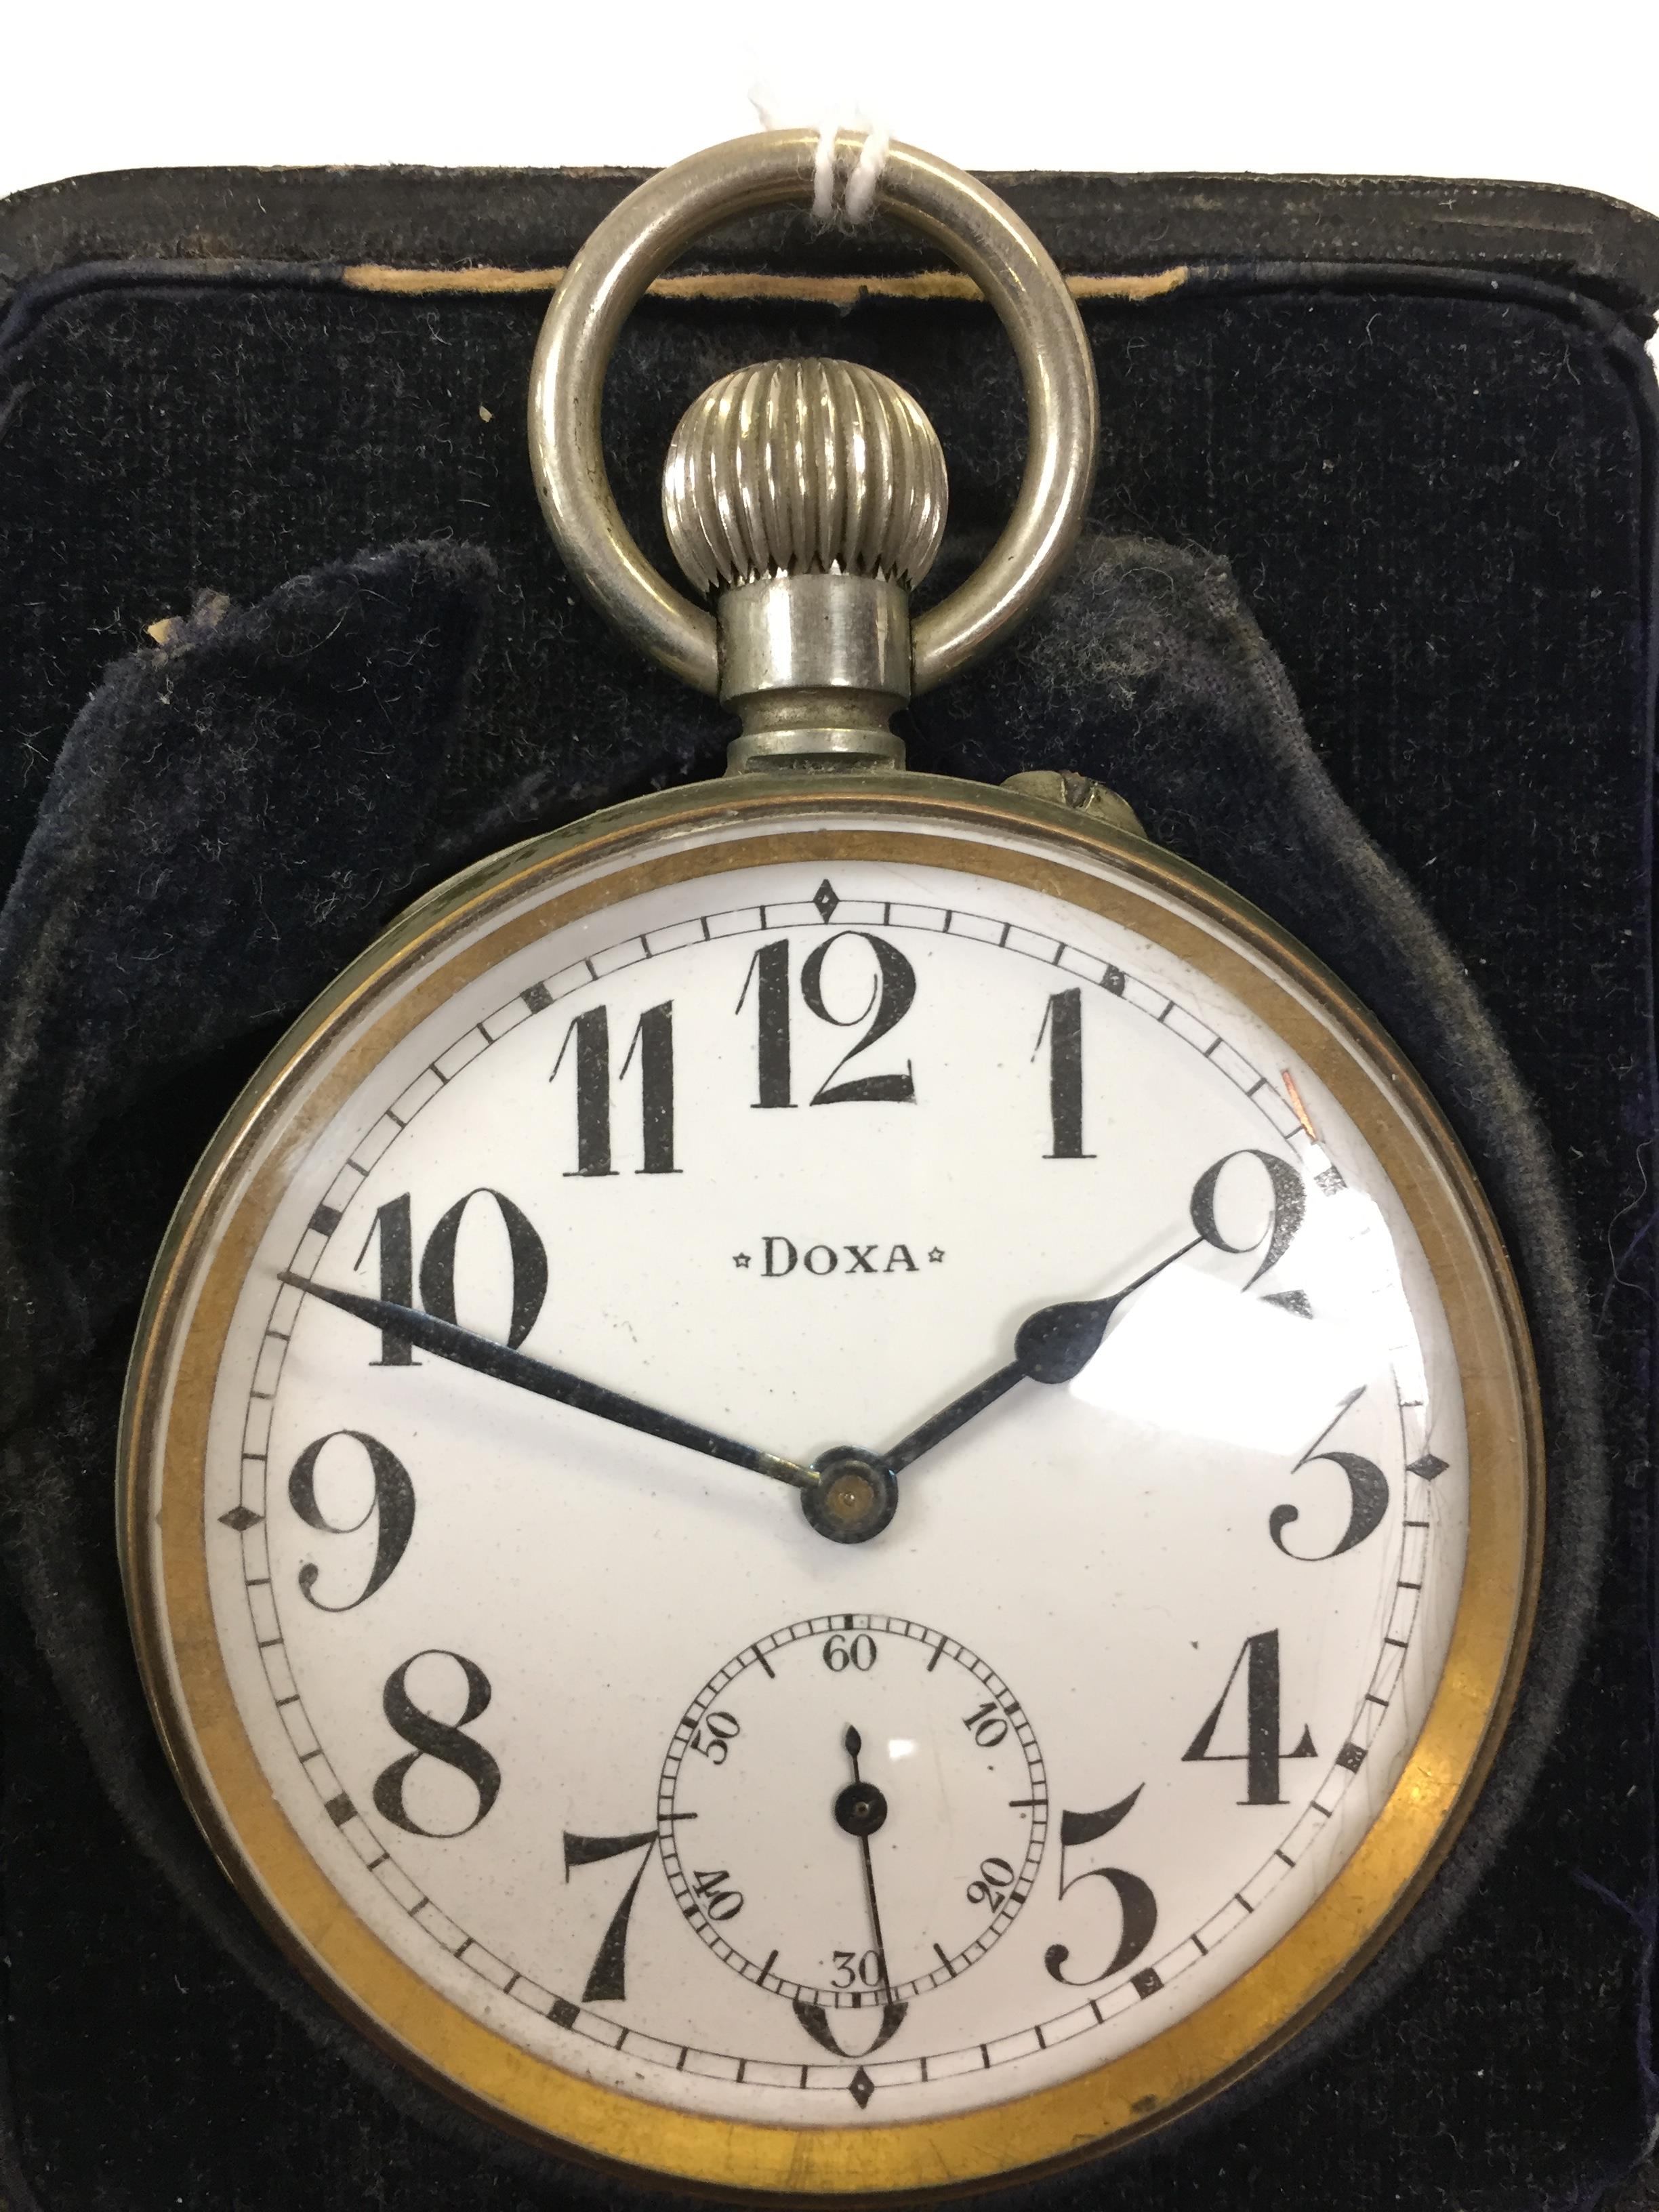 NICKEL CASED OVERSIZED POCKET WATCH BY DOXA IN A SILVER FRONTED NIGHT CASE STAND - Image 2 of 3